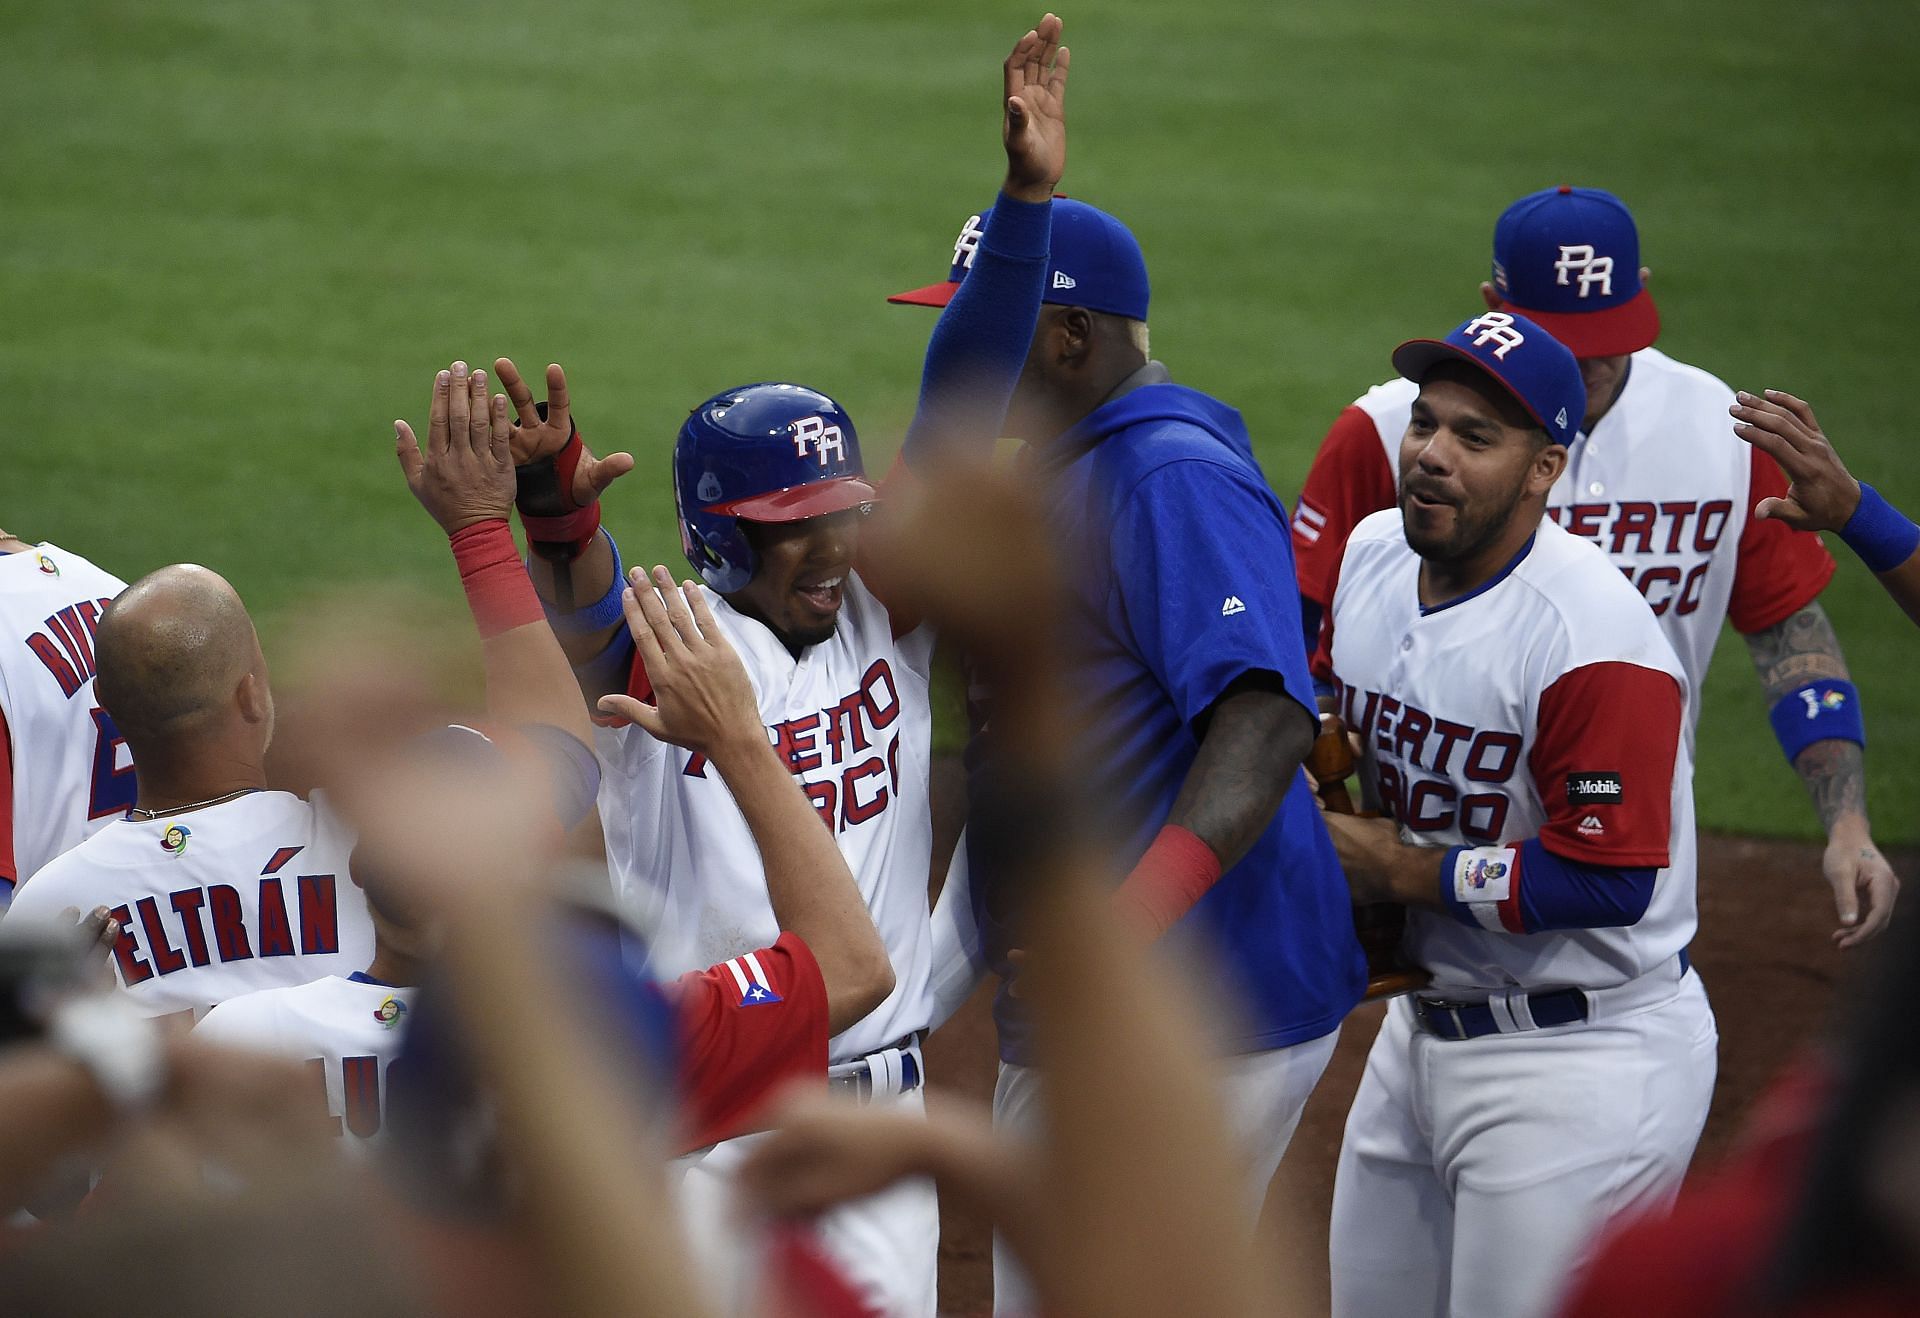 Mets closer Edwin Díaz injures knee at WBC; USA advances to quarterfinals   Phillies Nation - Your source for Philadelphia Phillies news, opinion,  history, rumors, events, and other fun stuff.